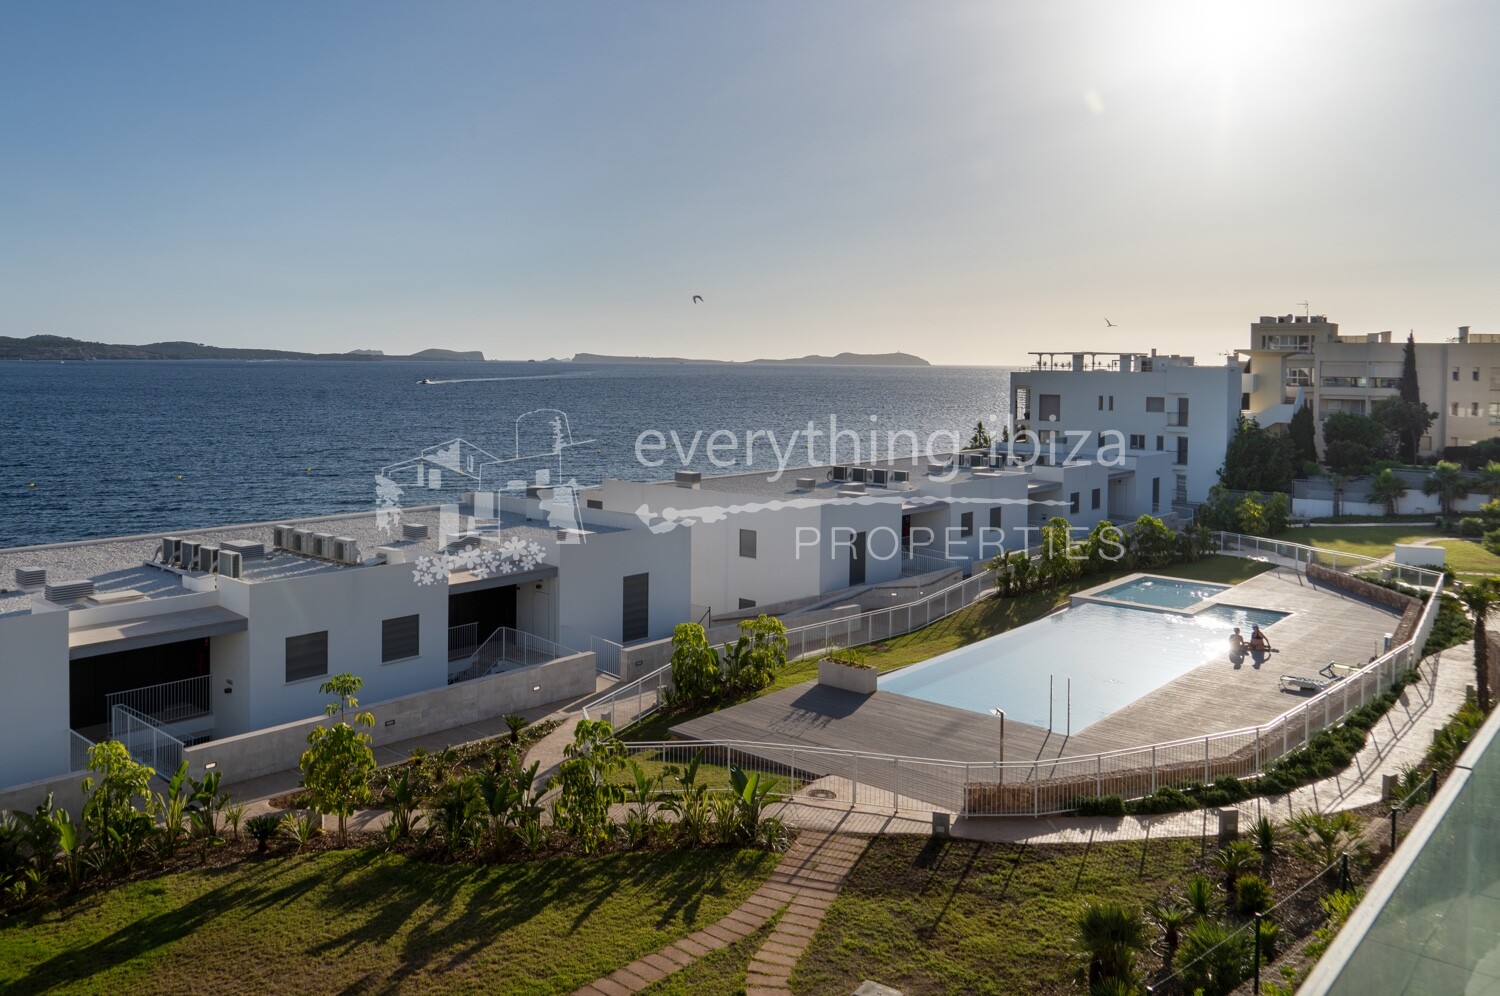 New Luxury Frontline 2 Bed Apartment Close to Beaches, ref. 1242, for sale in Ibiza by everything ibiza Properties